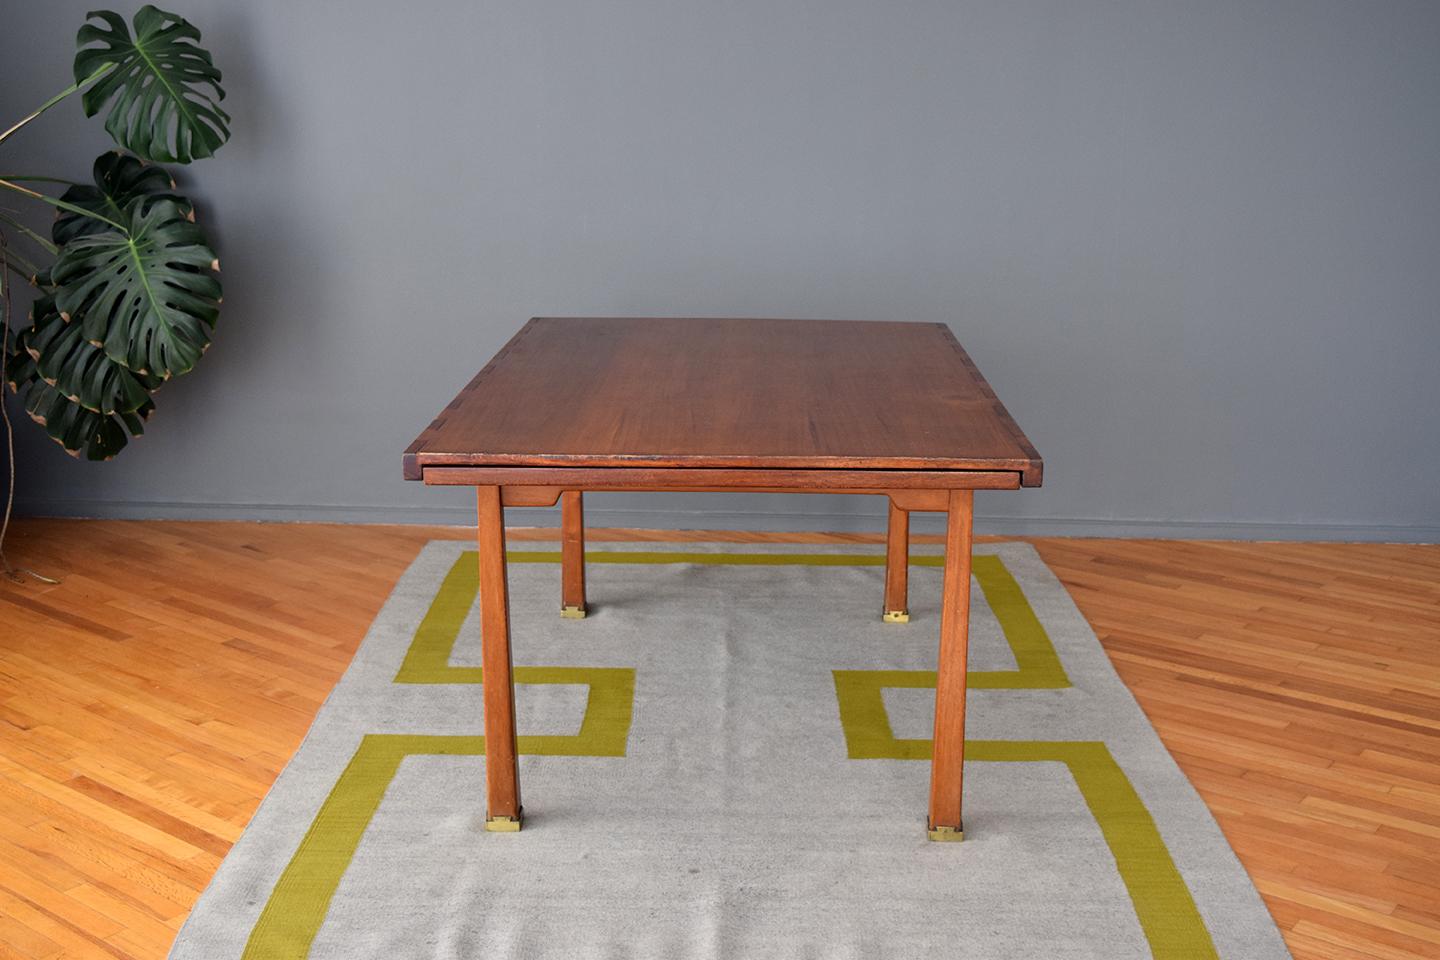 Edmond Spence dinning table for Industria Mueblera Mexicana. Made in Mexico. All original,
circa 1970s.